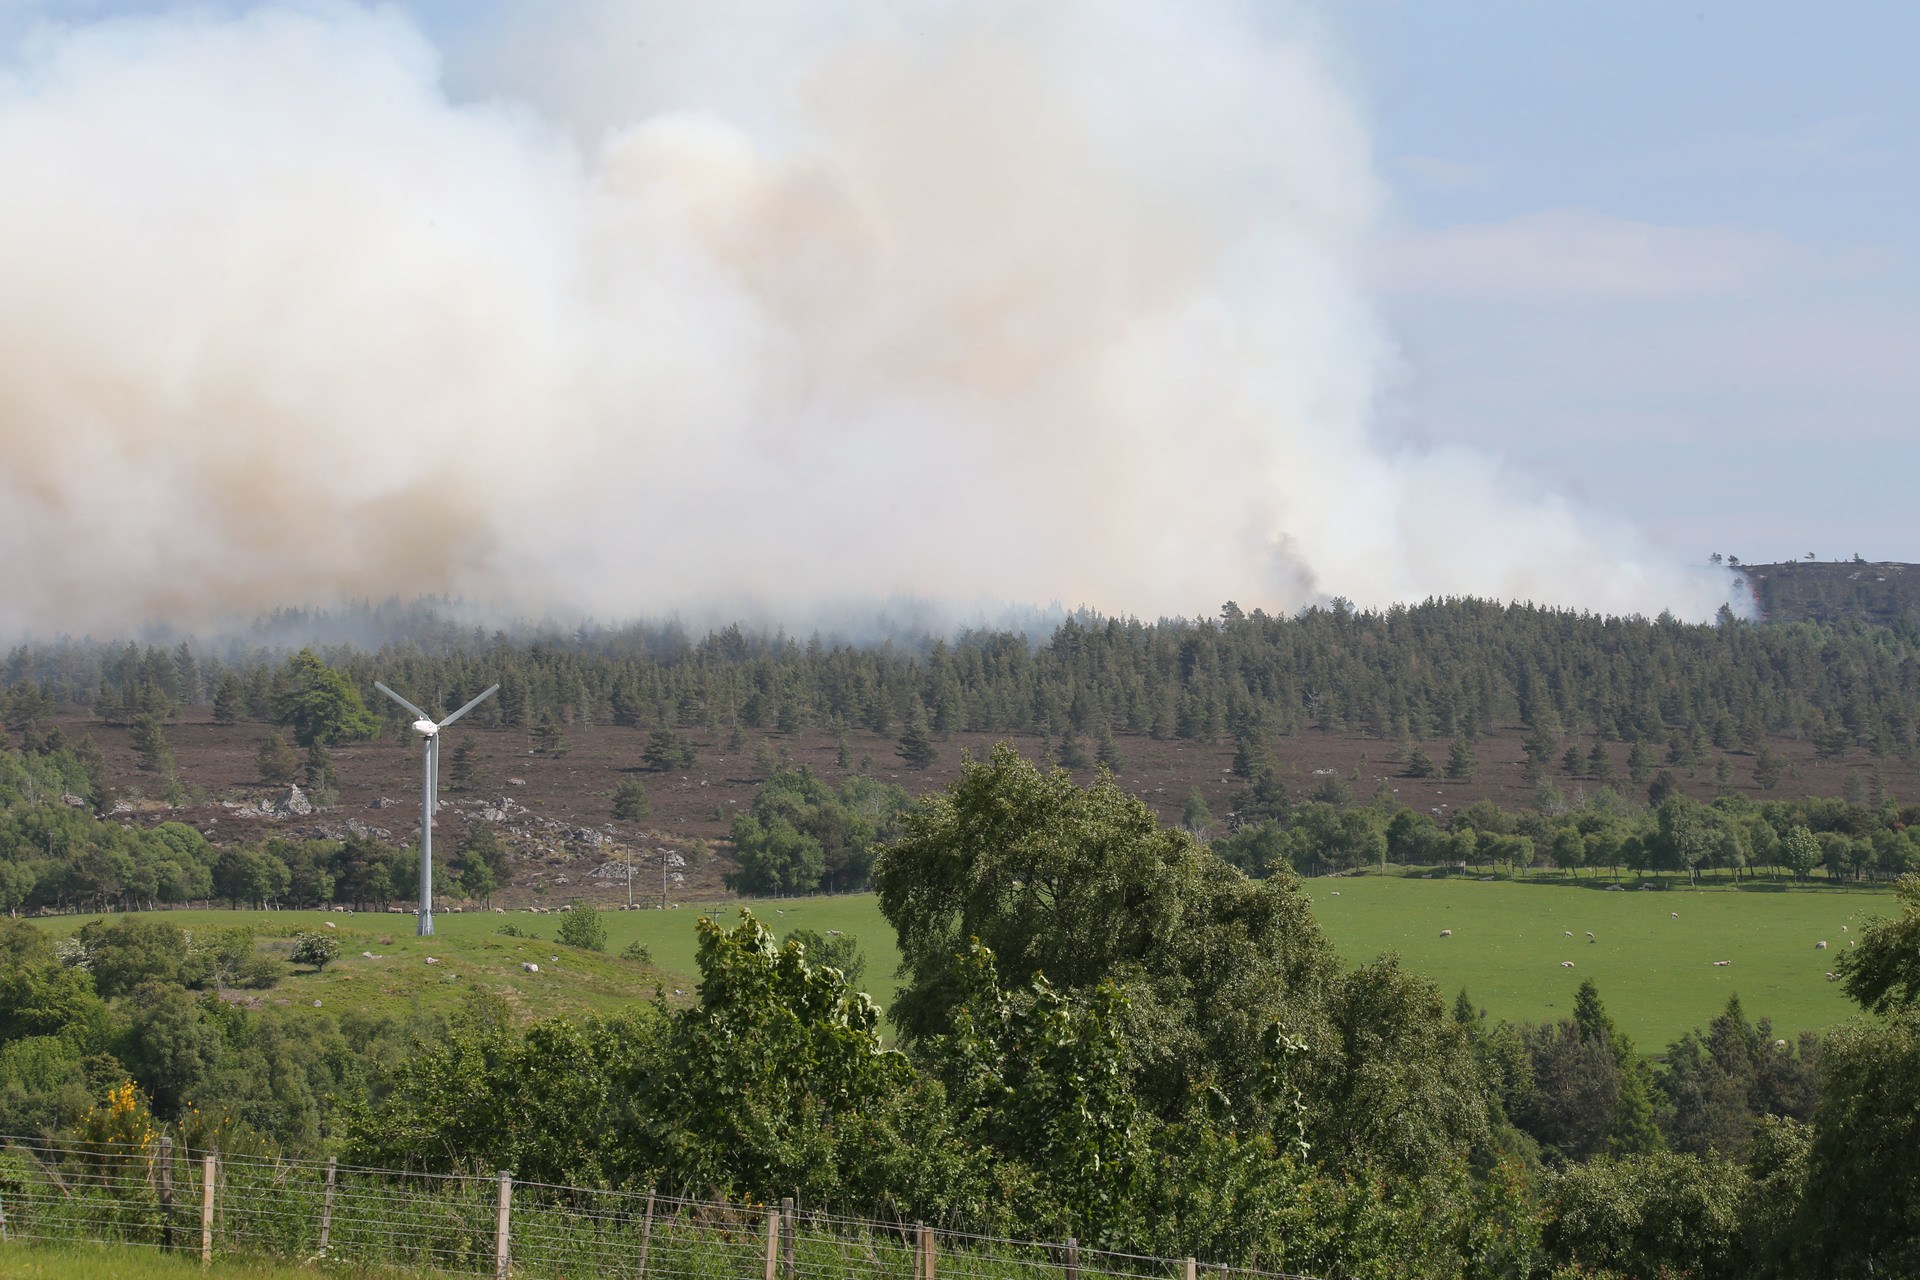 Smoke from the fire could be seen from miles away.